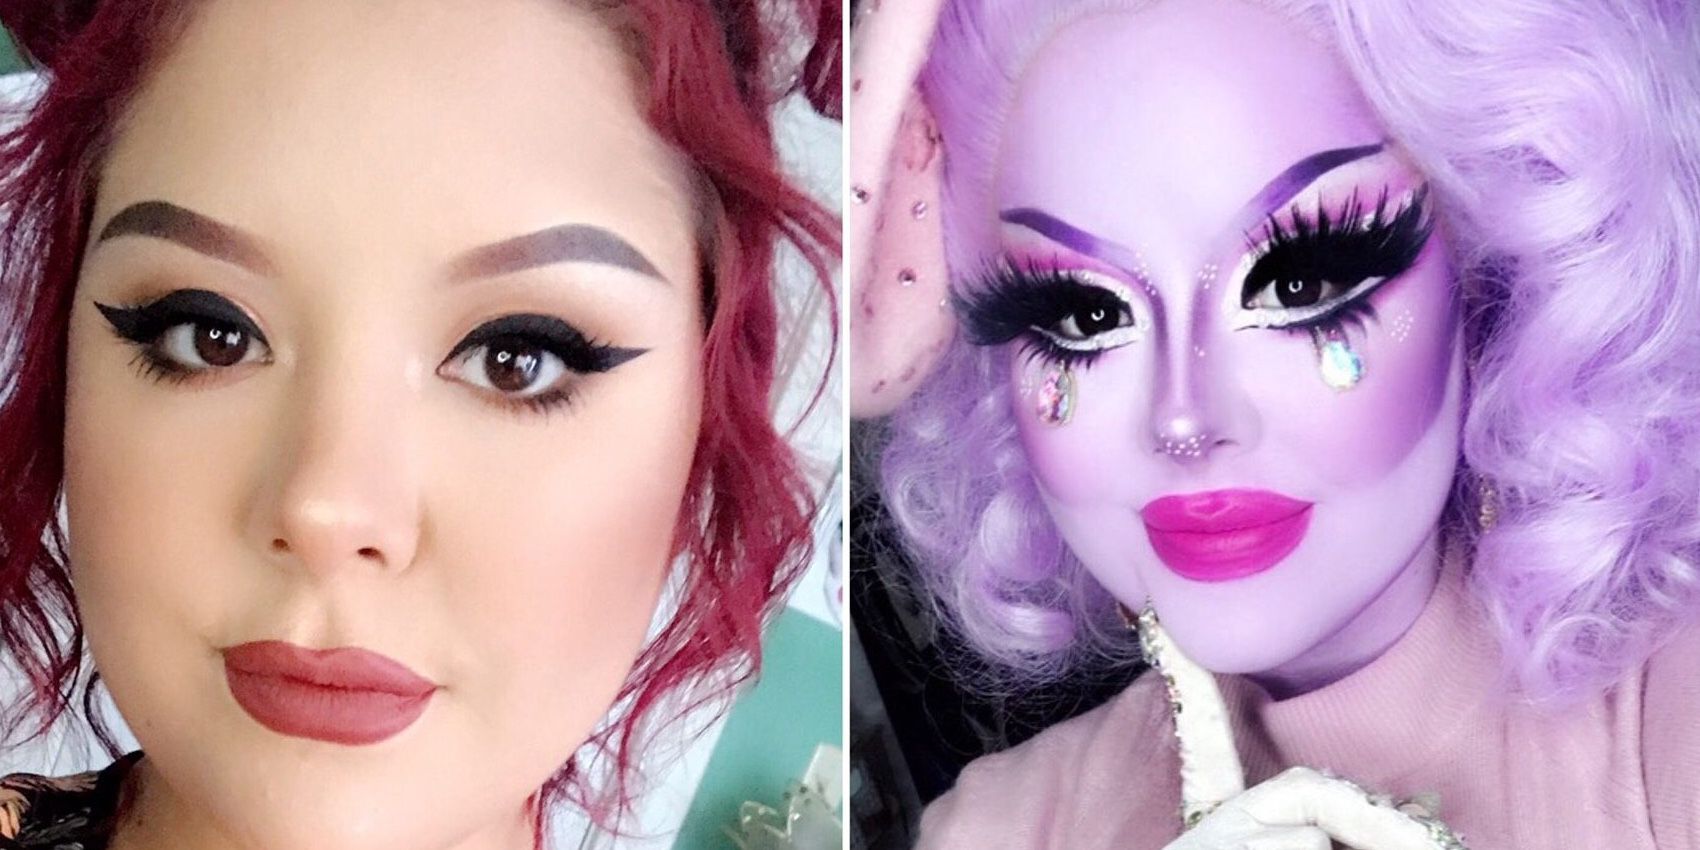 RuPaul's Drag Race: 10 Popular Drag Queens Who Haven't Been On The Show Yet